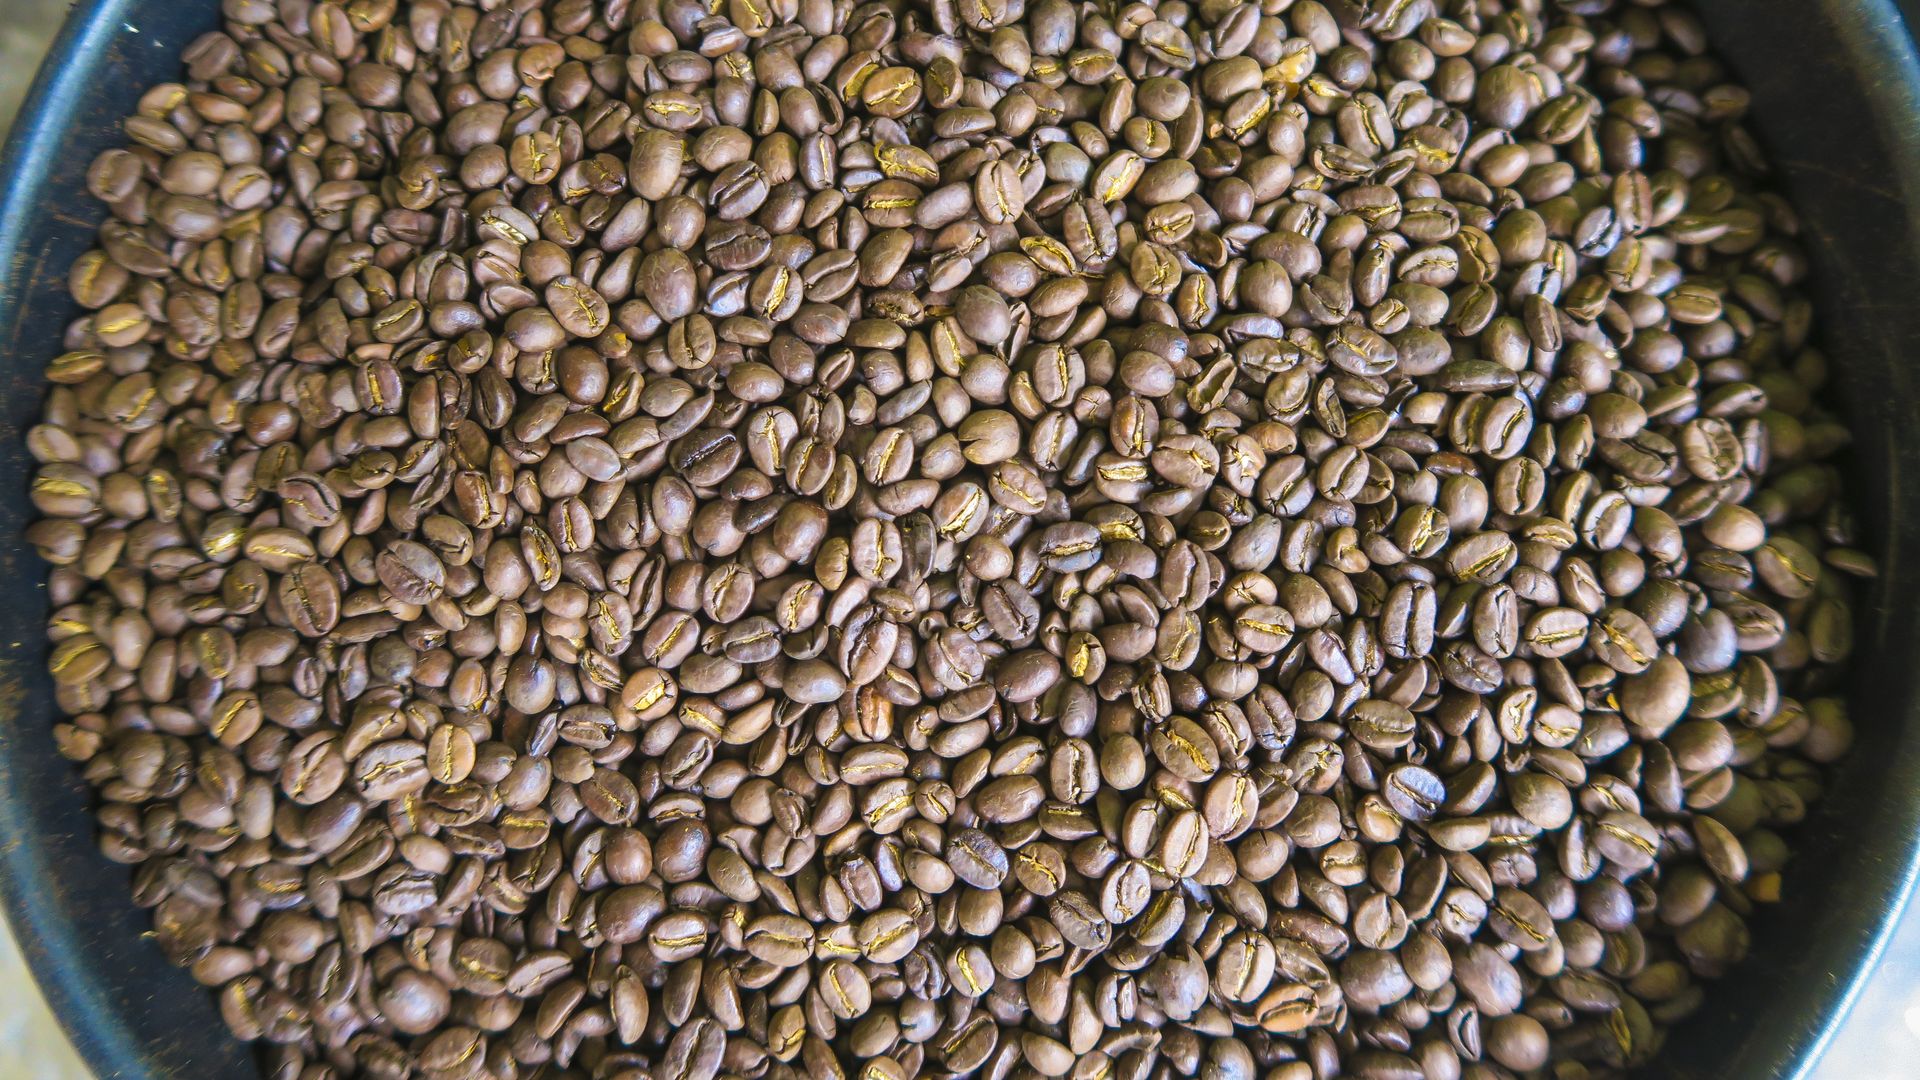 Local roasted coffee beans, Arabica, at the coffee farm La Victoria on August 19, 2016 in Minca, Colombia. The coffee is made for export. (Photo by EyesWideOpen/Getty Images)